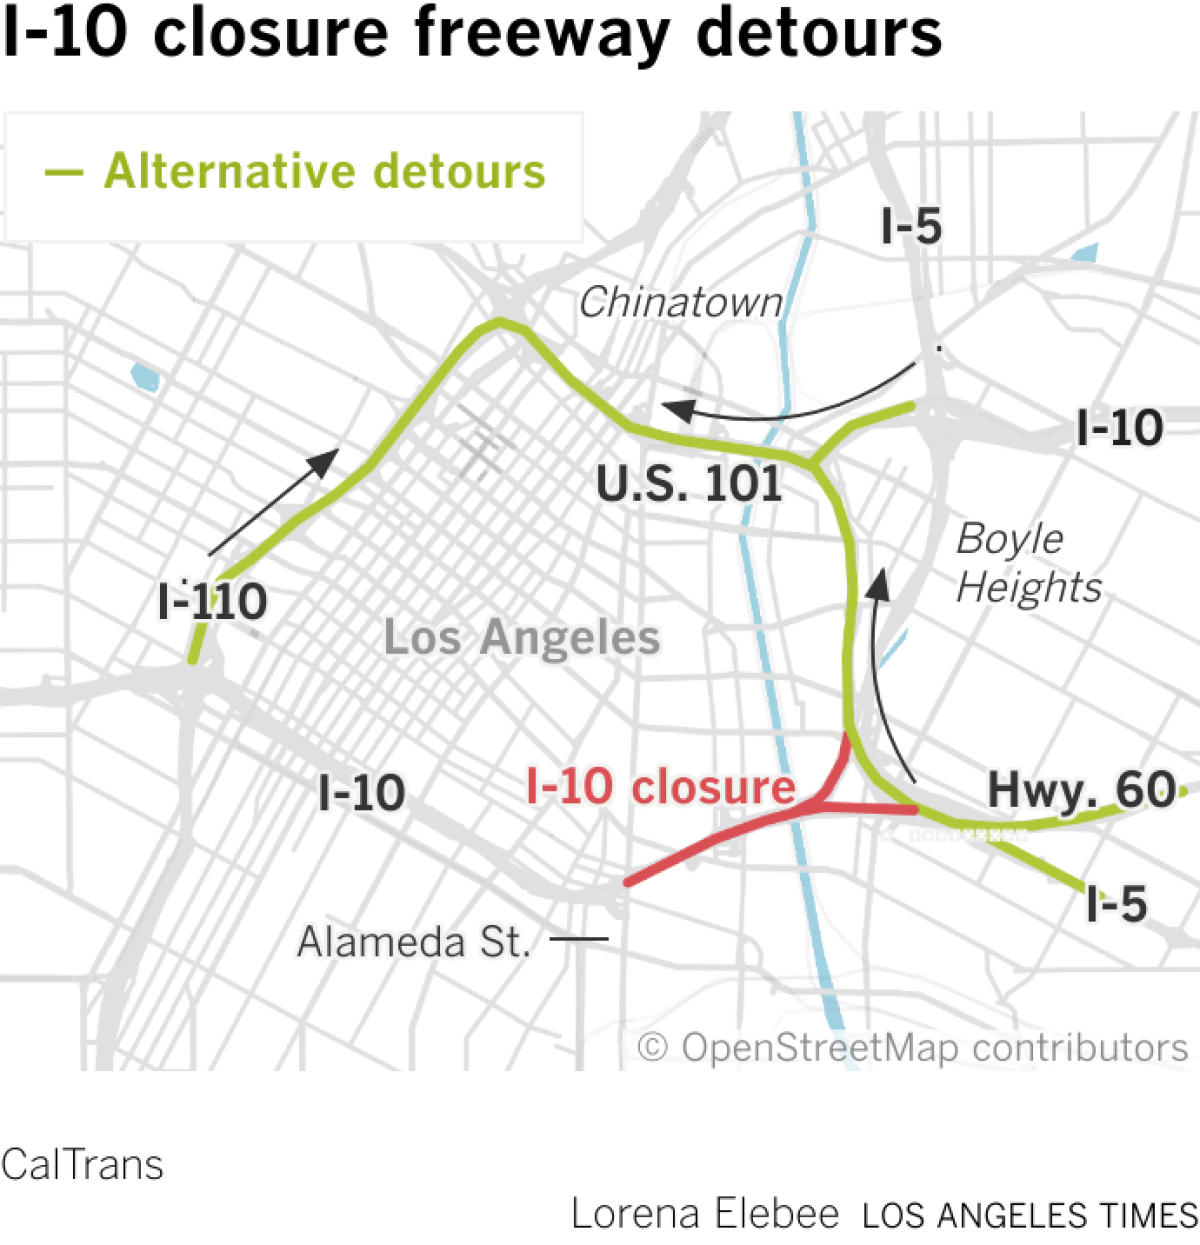 Map showing the I-10 closure freeway and alternative routes in downtown Los Angeles,